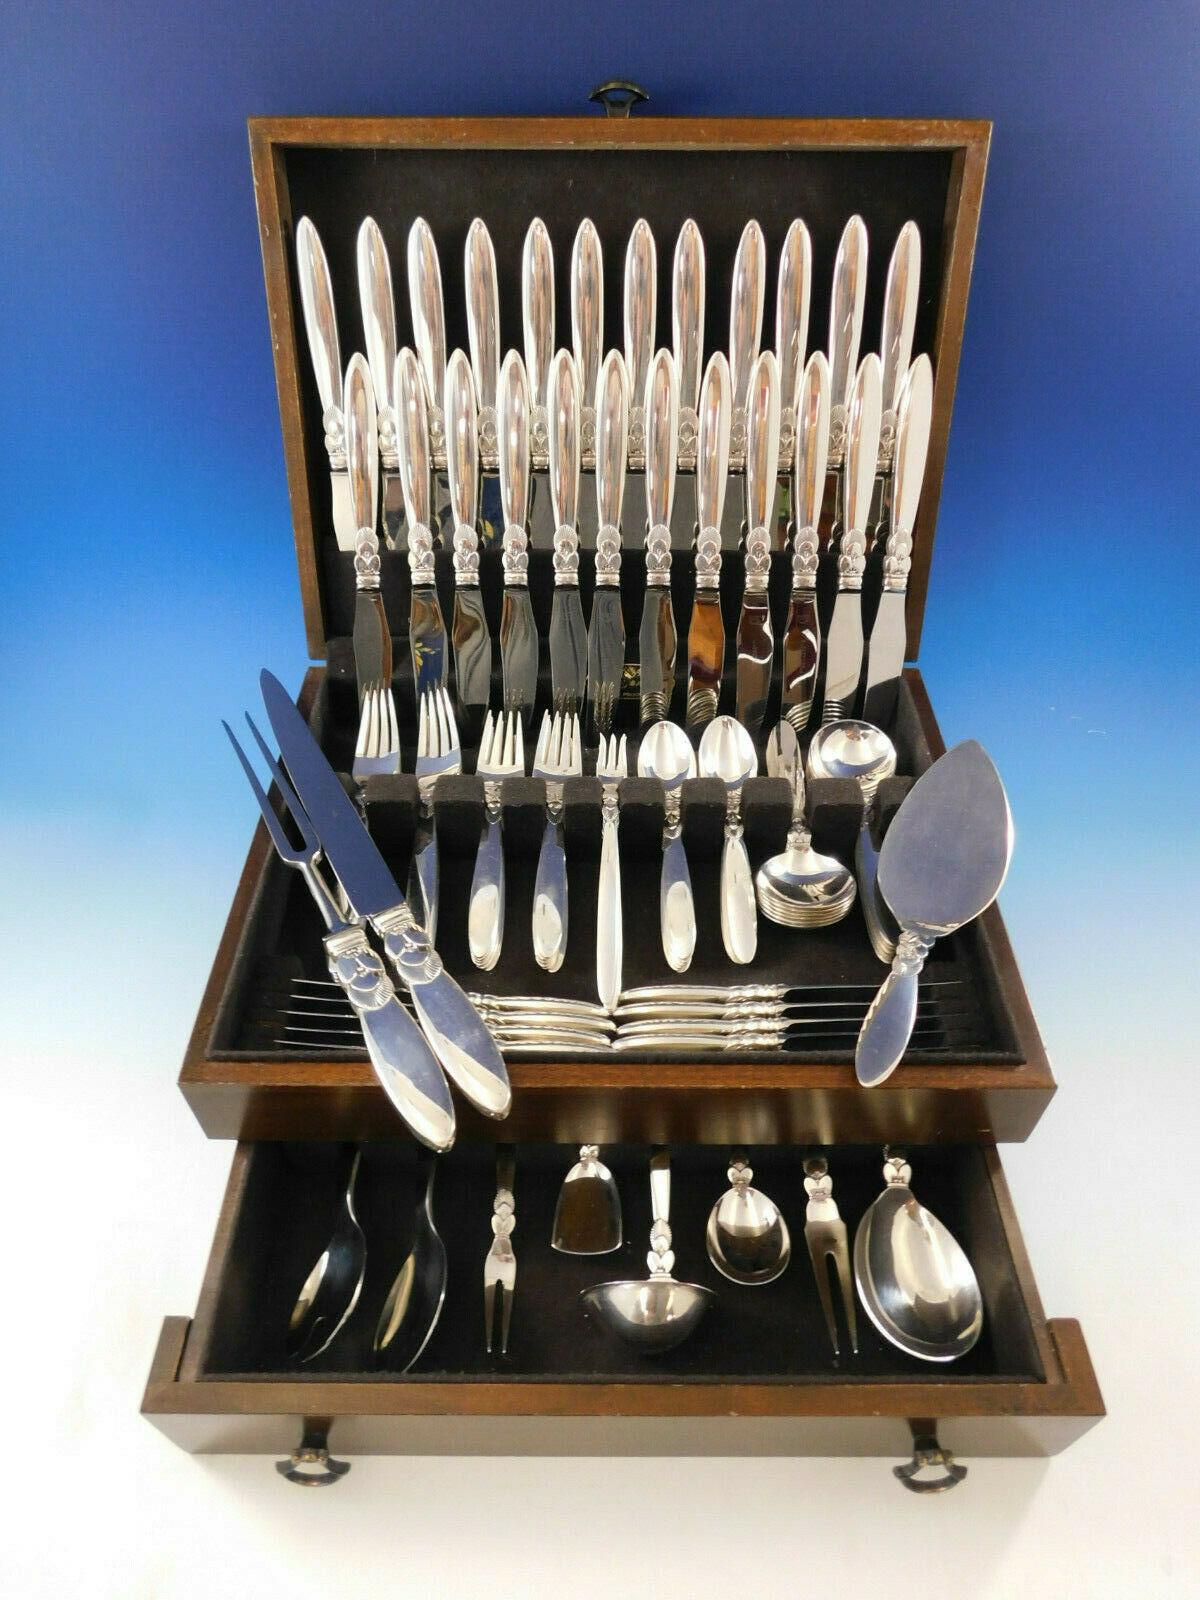 Superb dinner size Cactus by Georg Jensen Danish sterling silver flatware set - 107 pieces. This set includes:

12 dinner size knives, long handle, 9 1/4